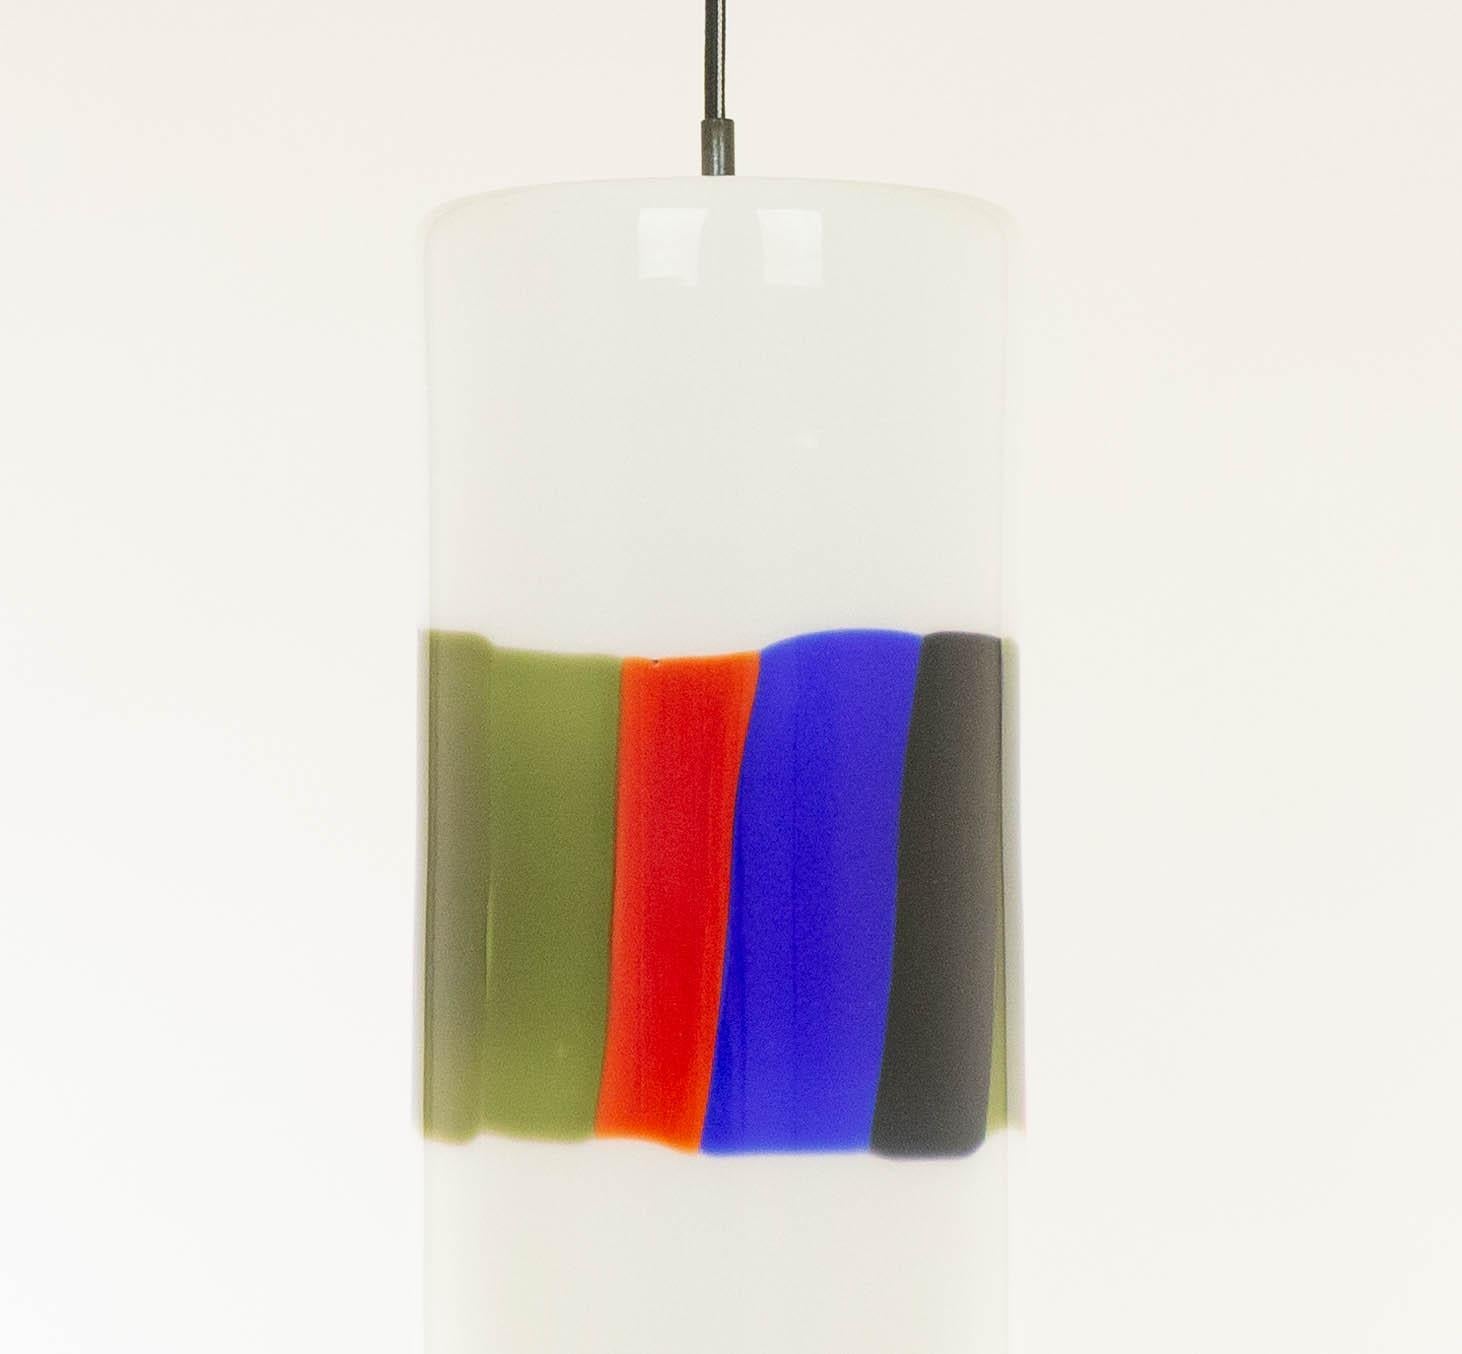 Metal L 59 Large Glass Pendant by Alessandro Pianon for Vistosi, 1960s For Sale